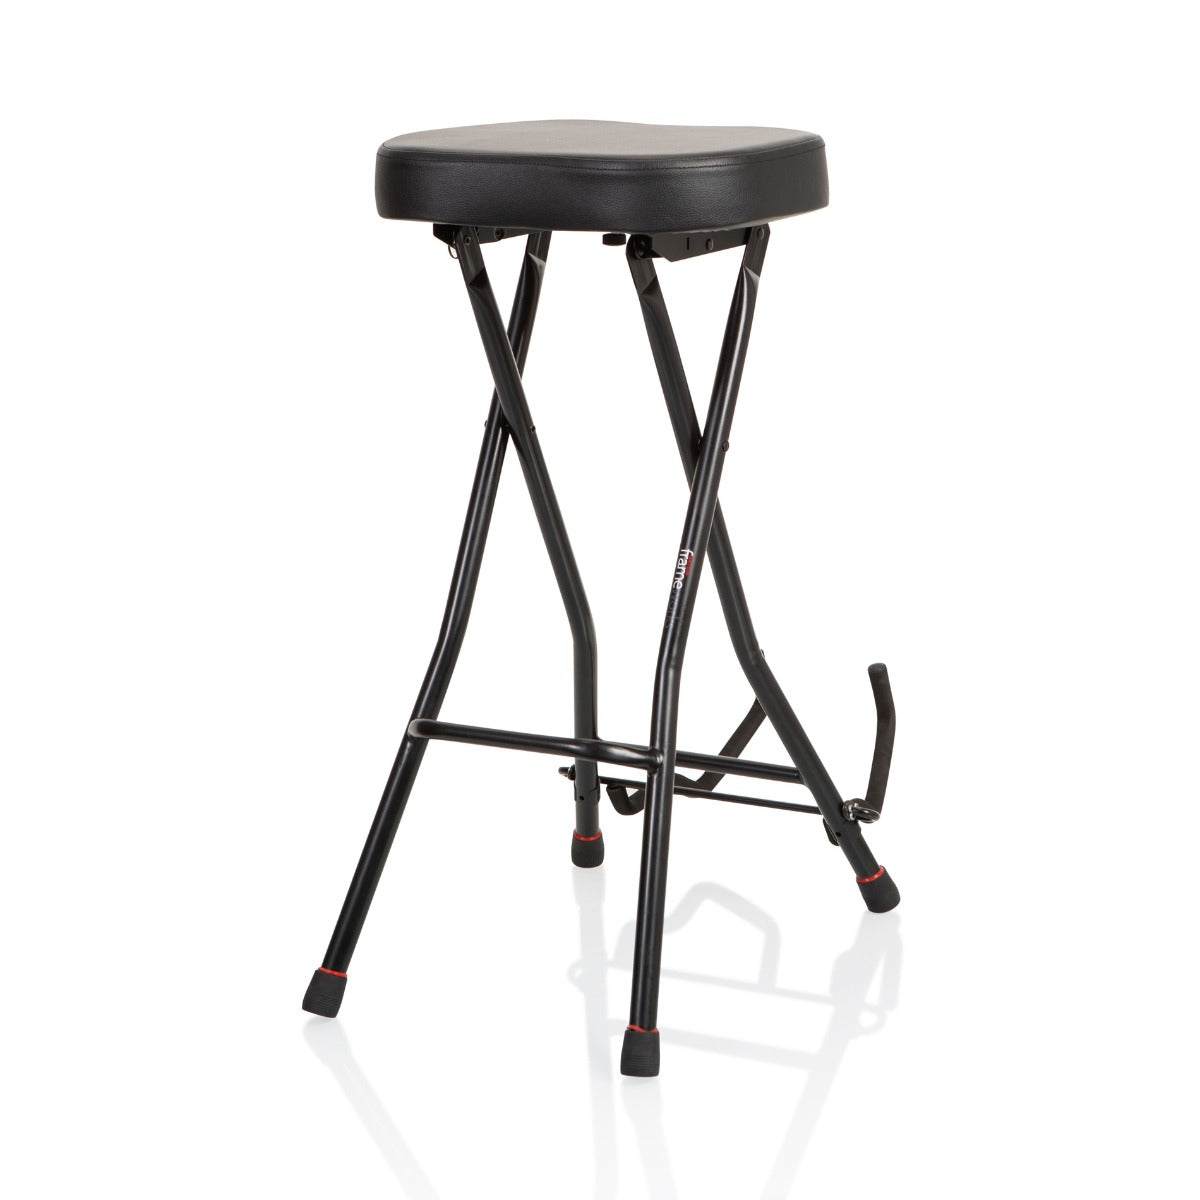 Rear angle of the Gator Frameworks Guitar Stool with Stand